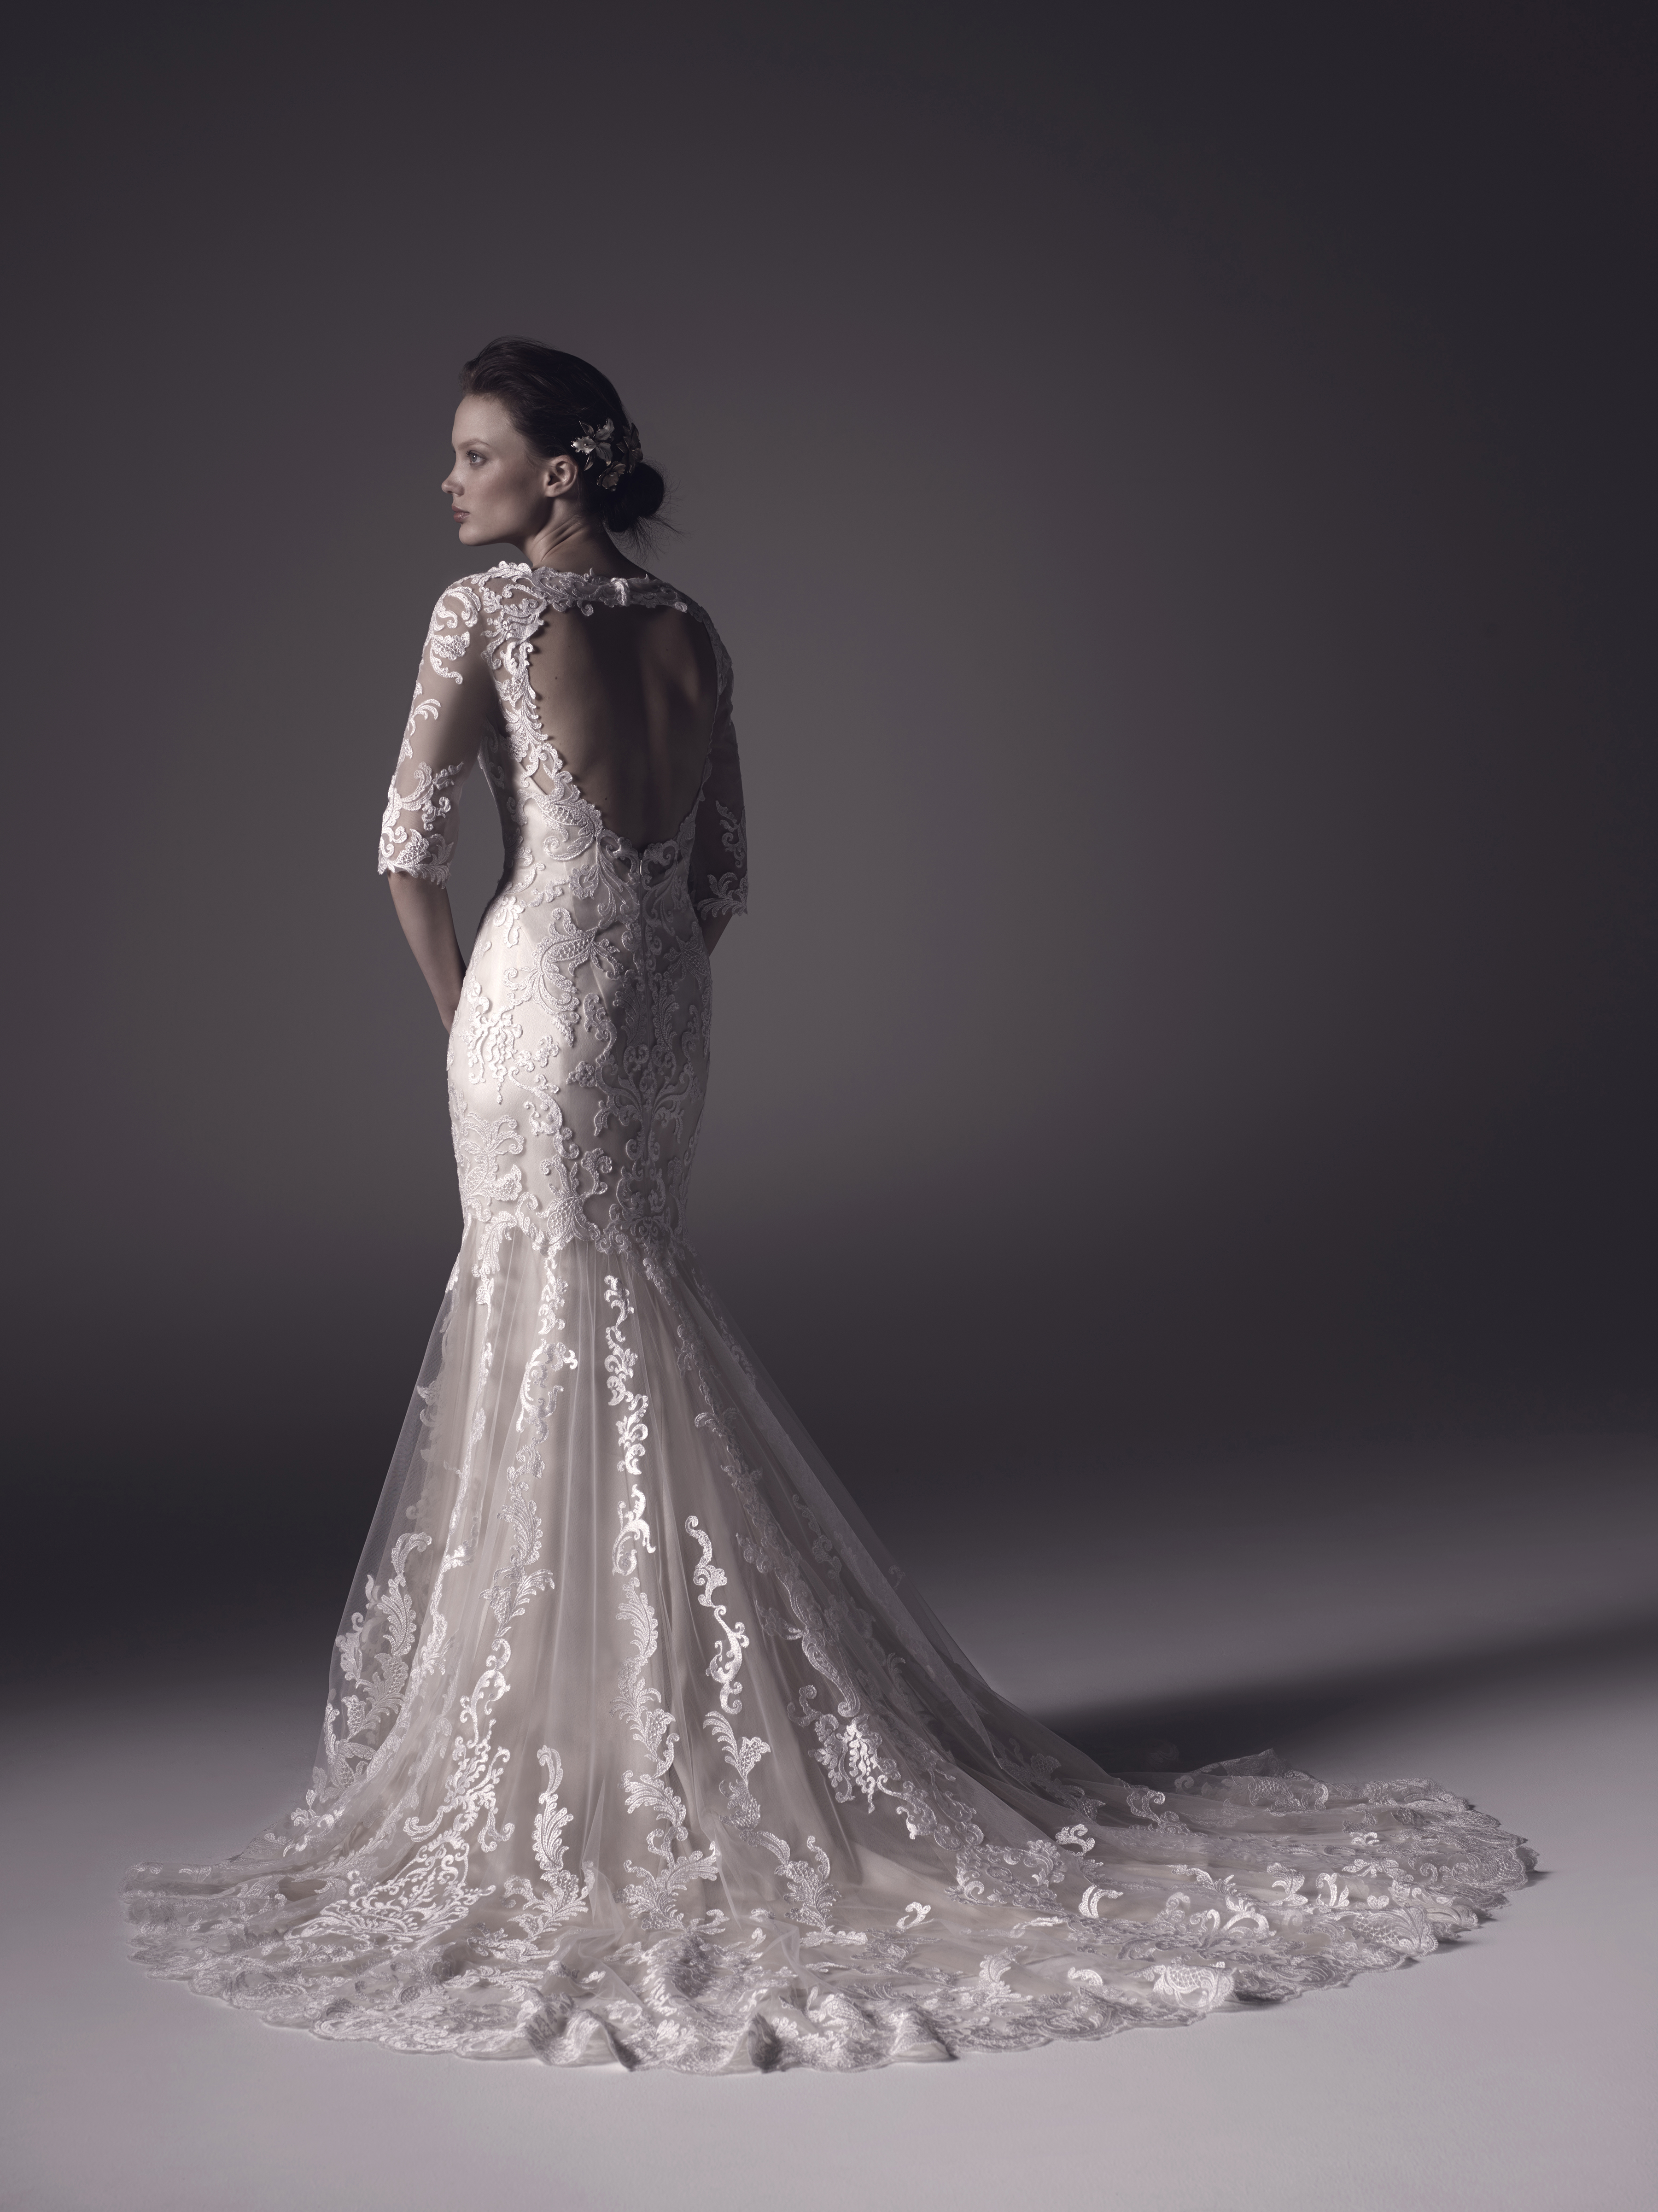 Best Plunging V-Neckline Gowns by Amare Couture / Blog / Amare Couture